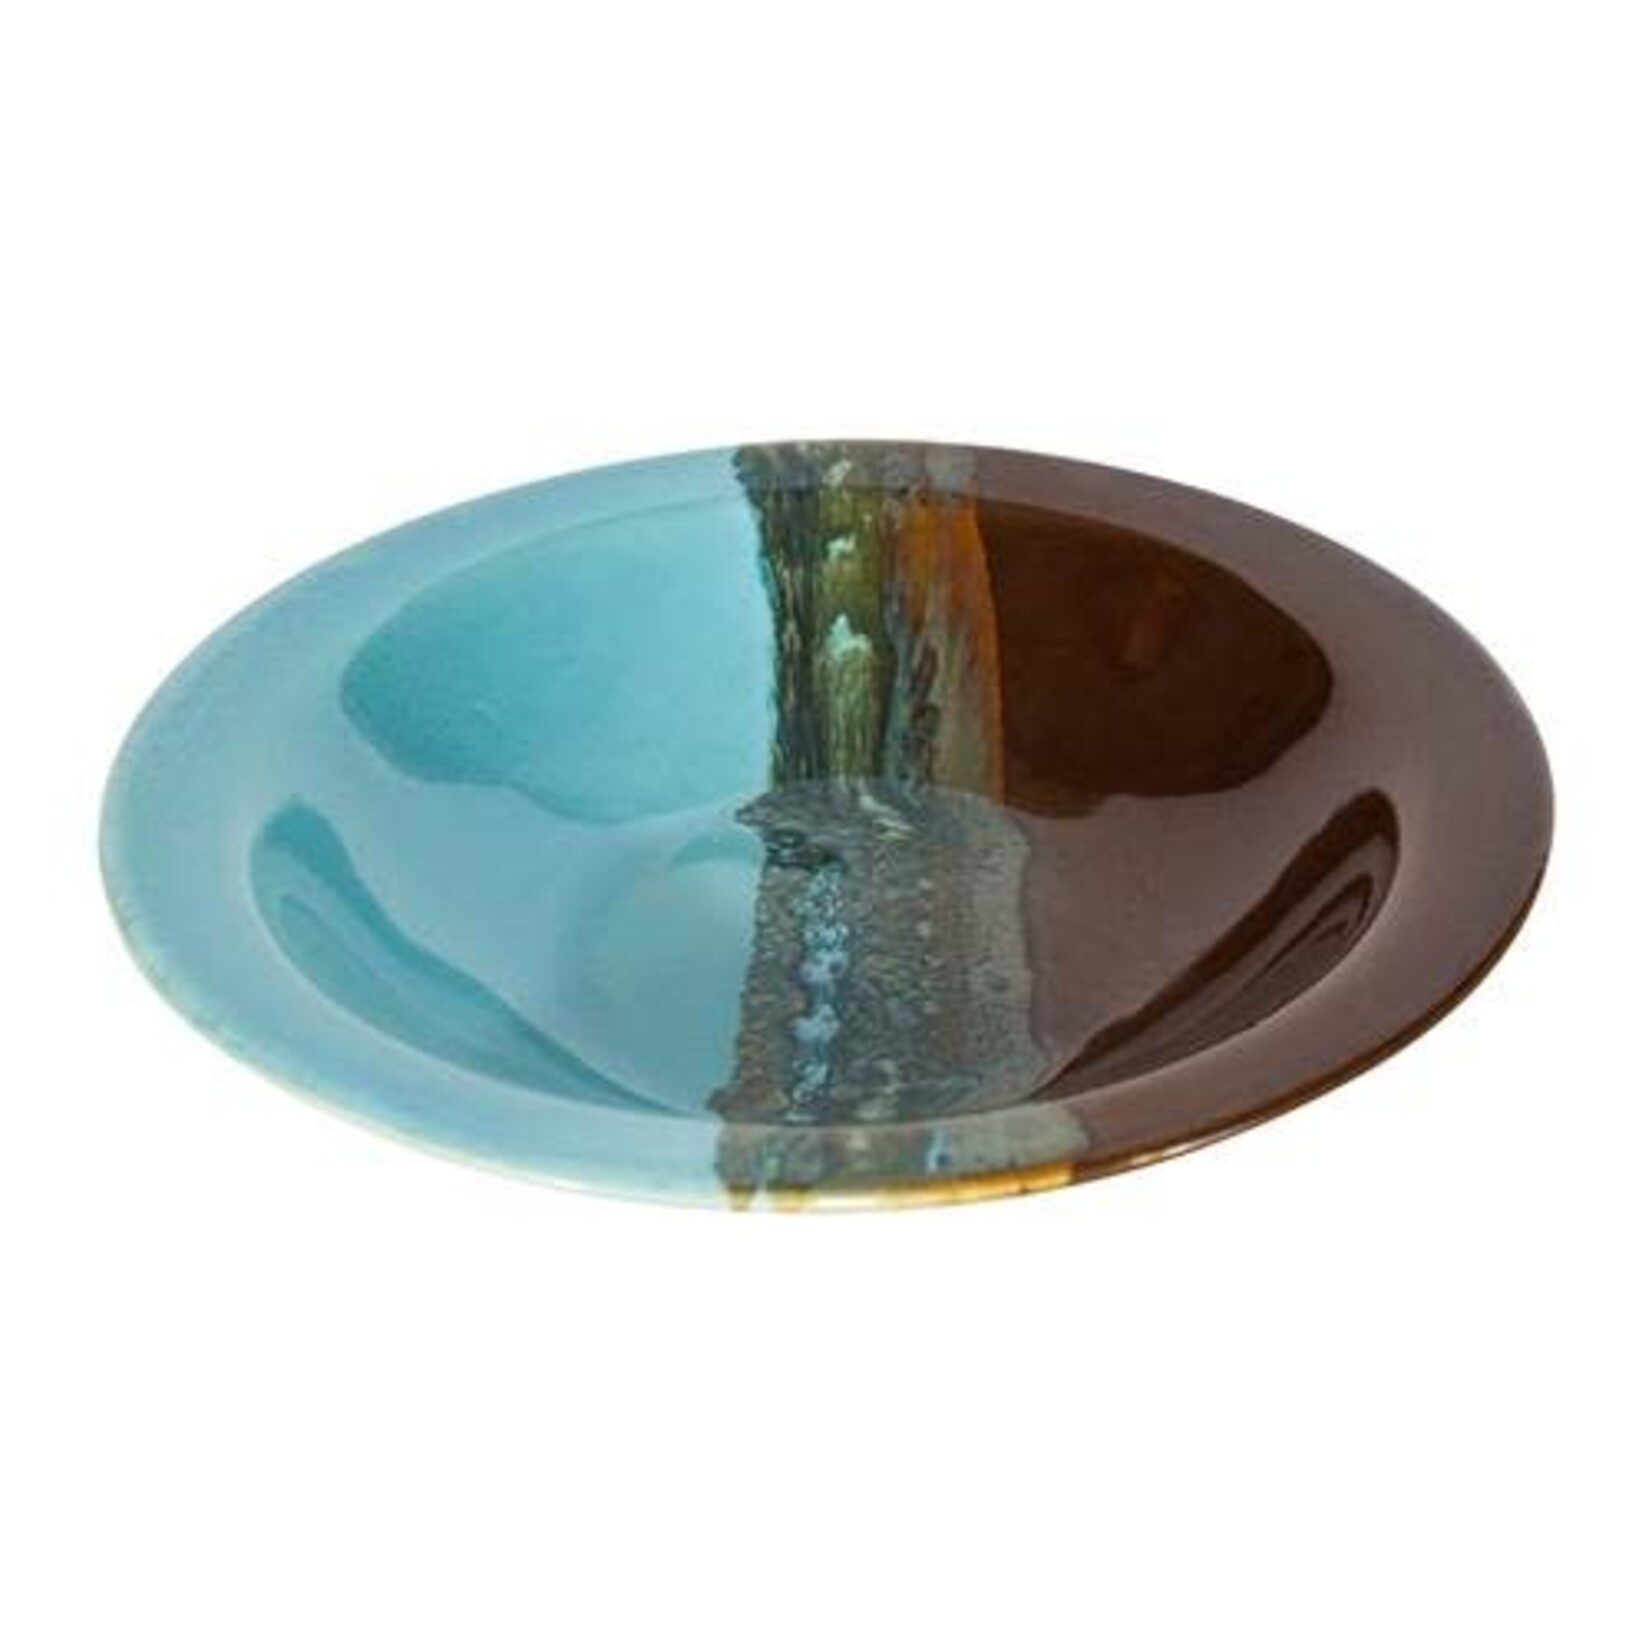 Clay in motion Salad Bowl